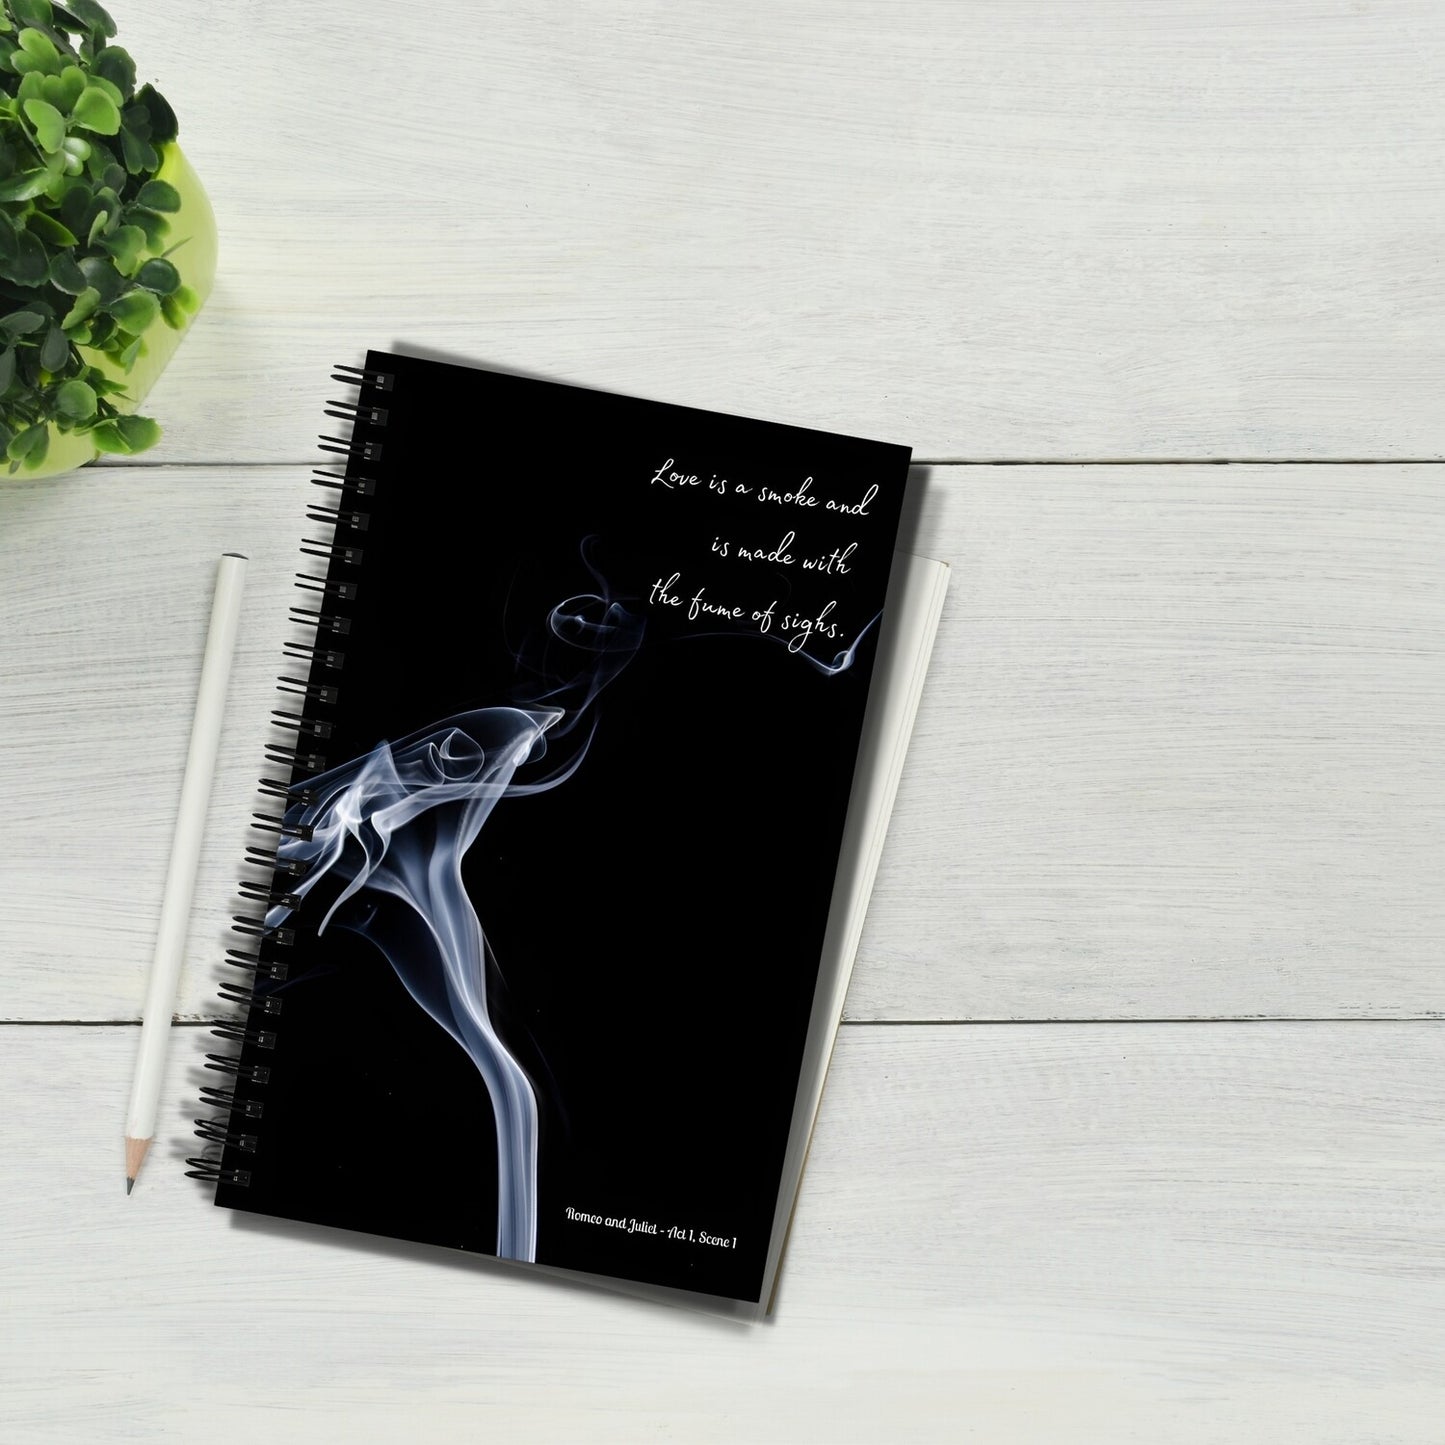 "Love is a Smoke" - Shakespeare Romeo and Juliet Quote Spiral Notebook